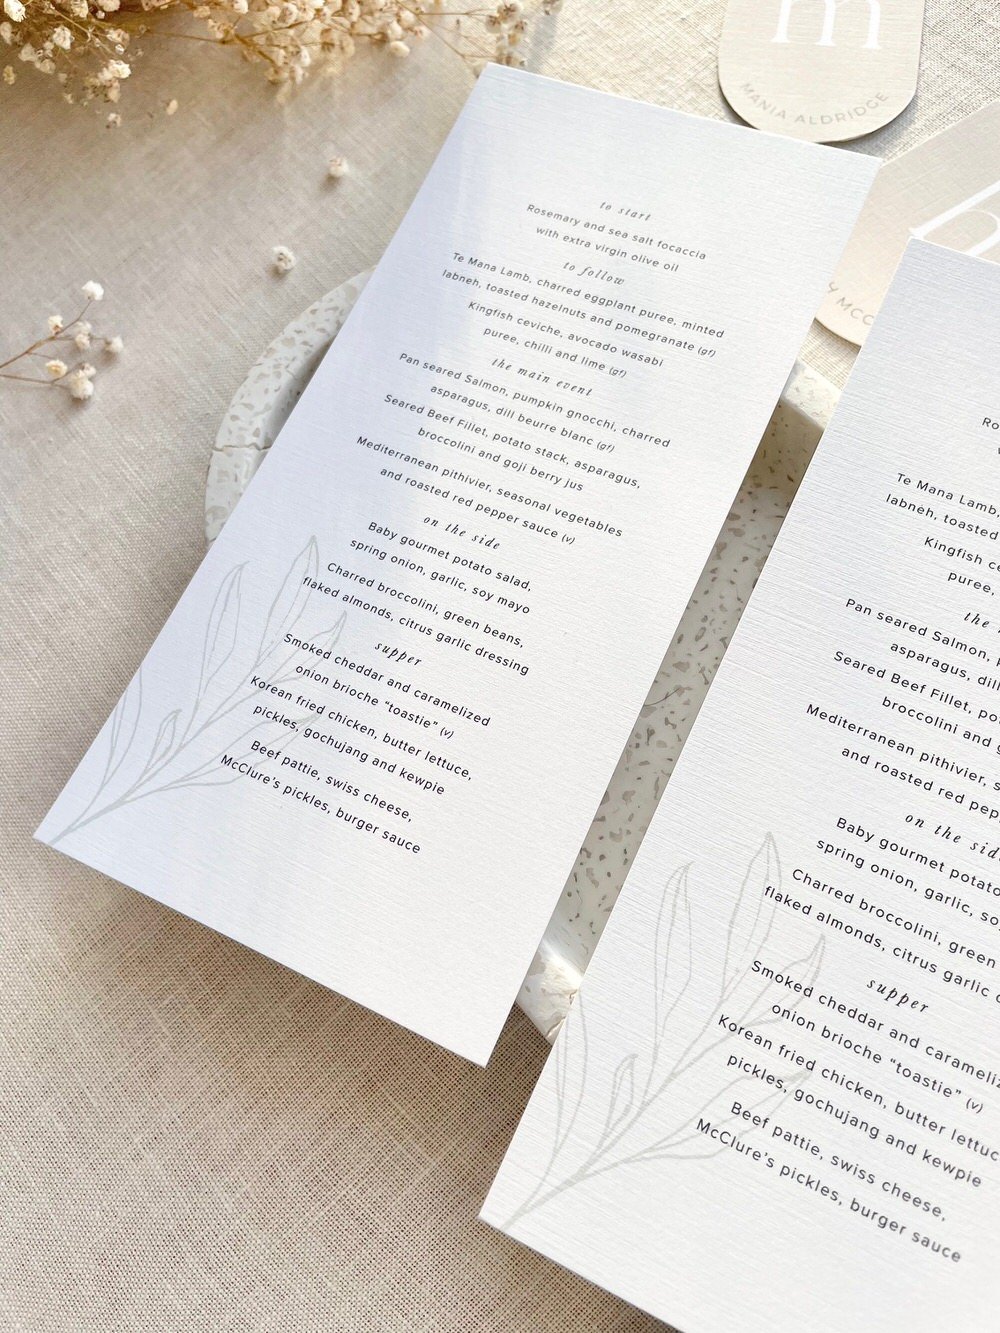 Just My Type Wedding Invitation Stationery NZ Wedding Menu Place Name Table Number9921.jpg